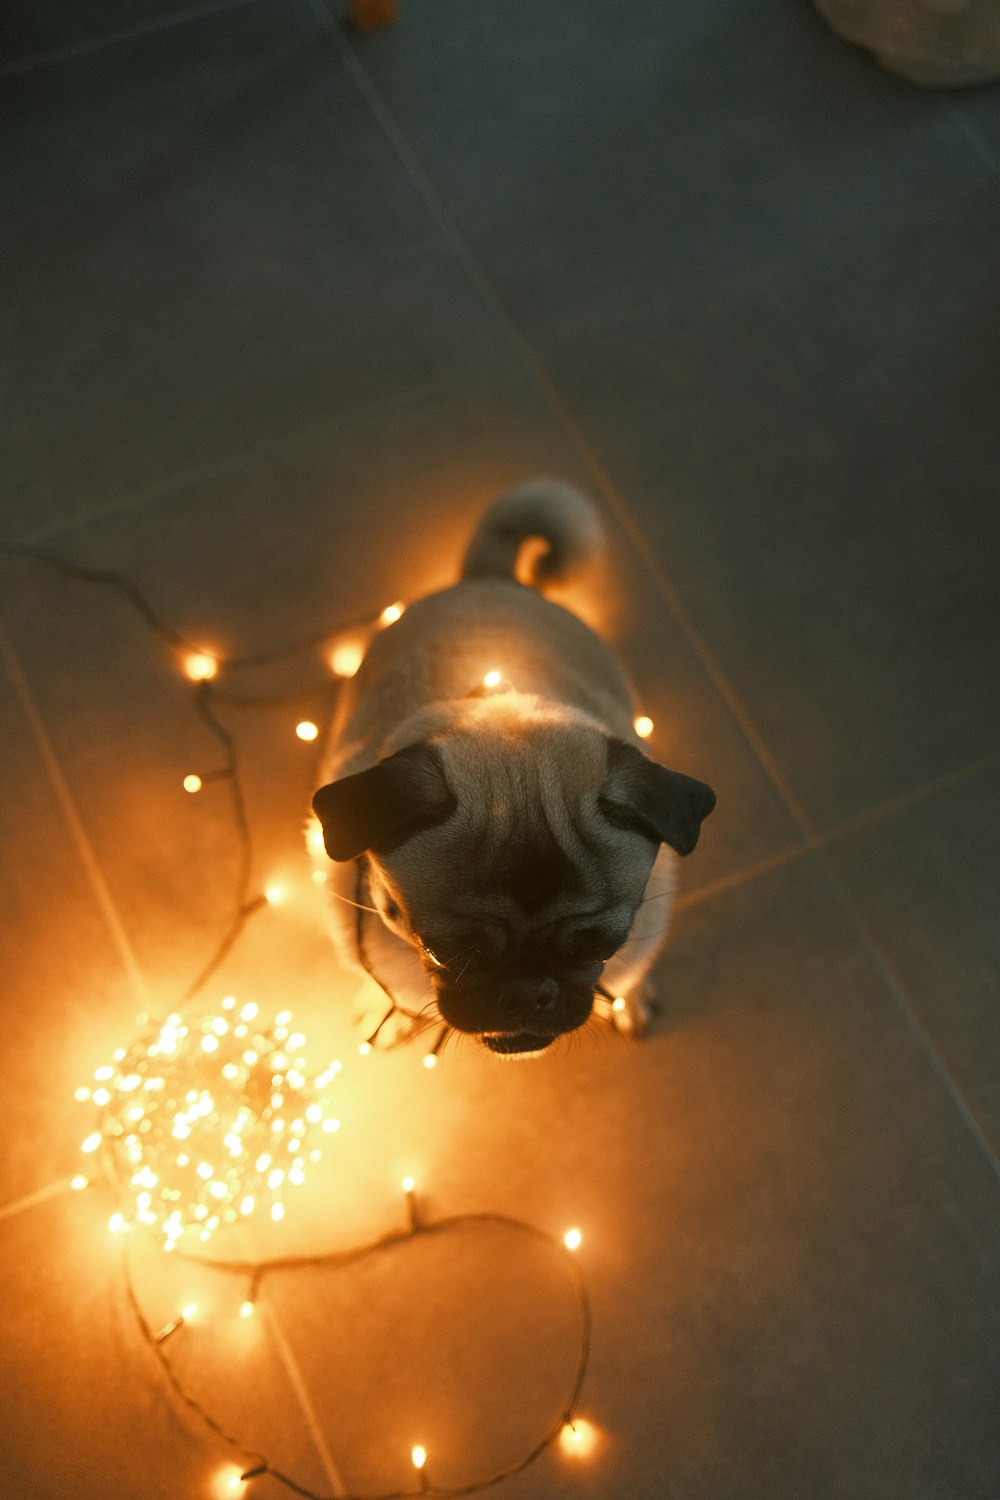 a pug dog standing on a tile floor with a string of lights